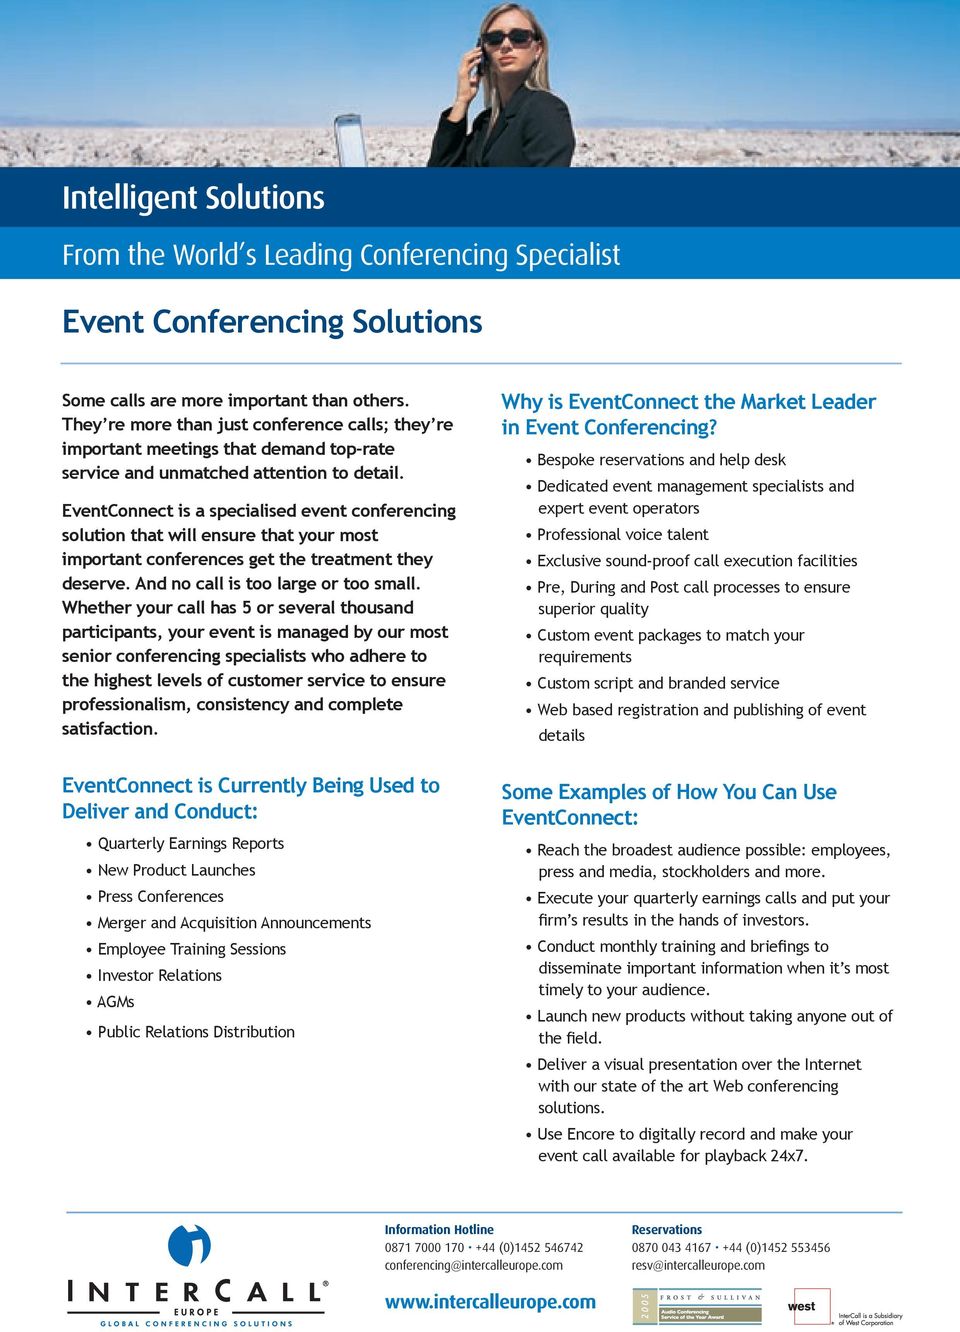 EventConnect is a specialised event conferencing solution that will ensure that your most important conferences get the treatment they deserve. And no call is too large or too small.